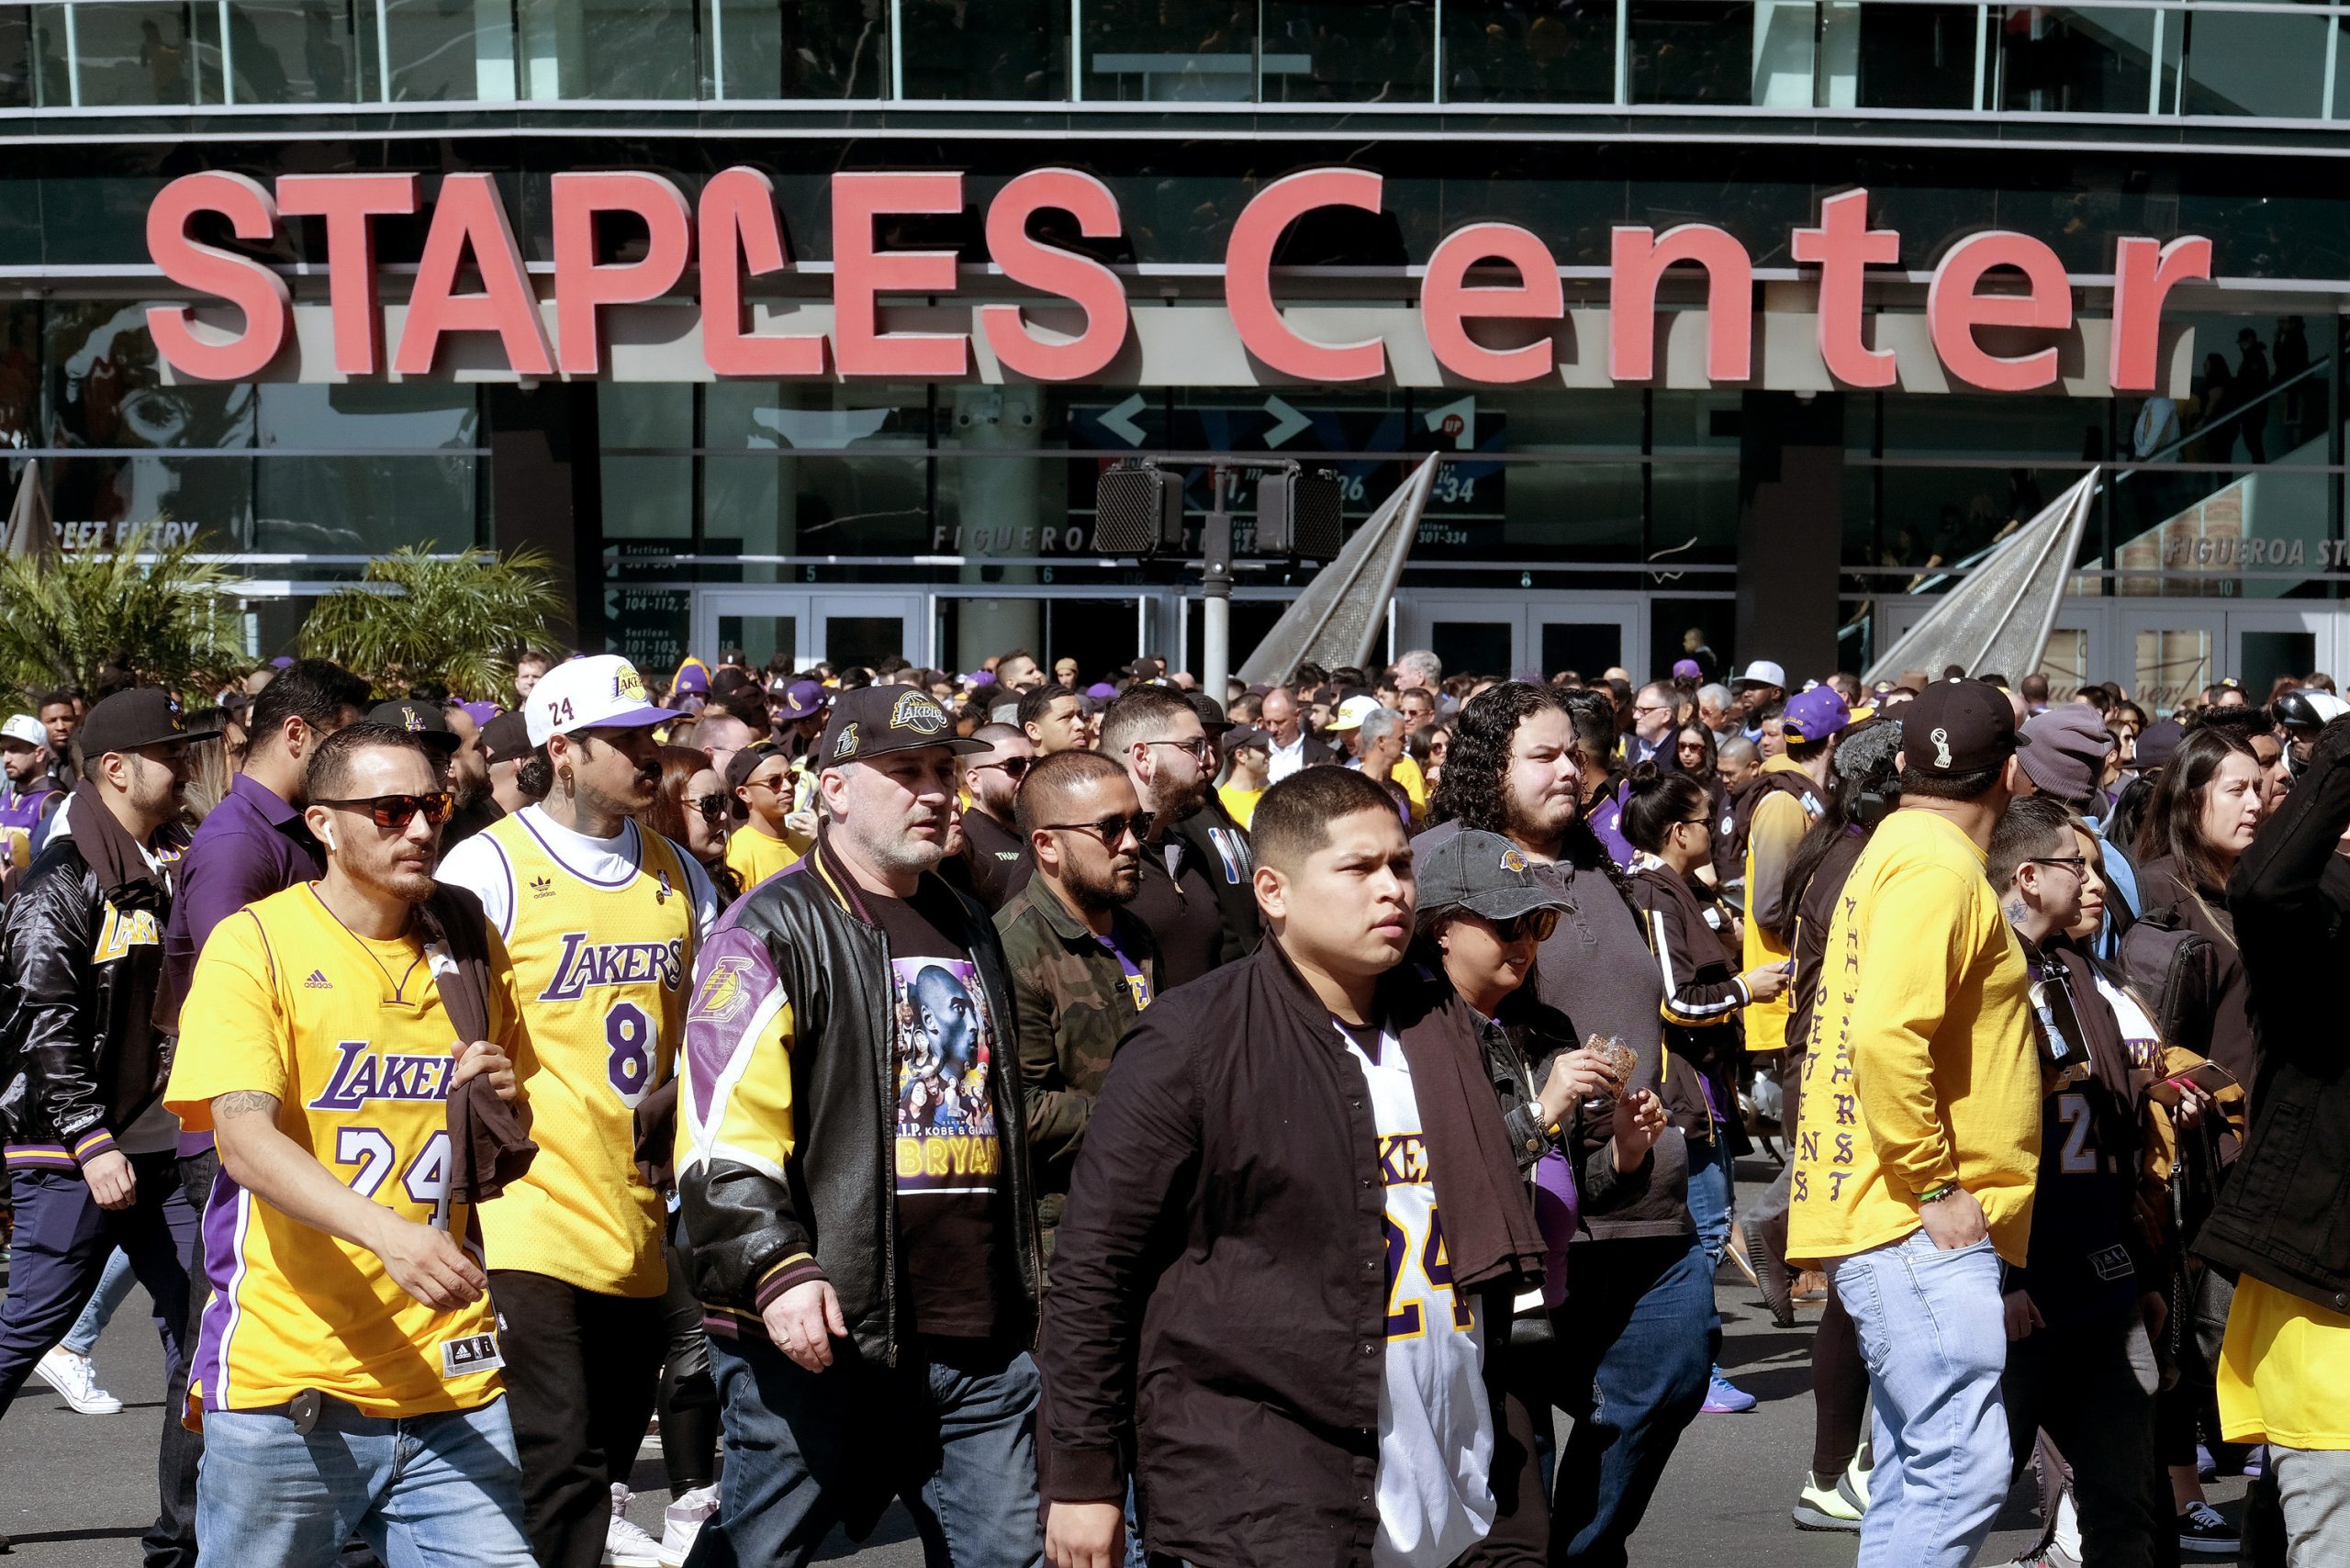 Thousands gather in Los Angeles to pay tribute to basketball star Kobe Bryant